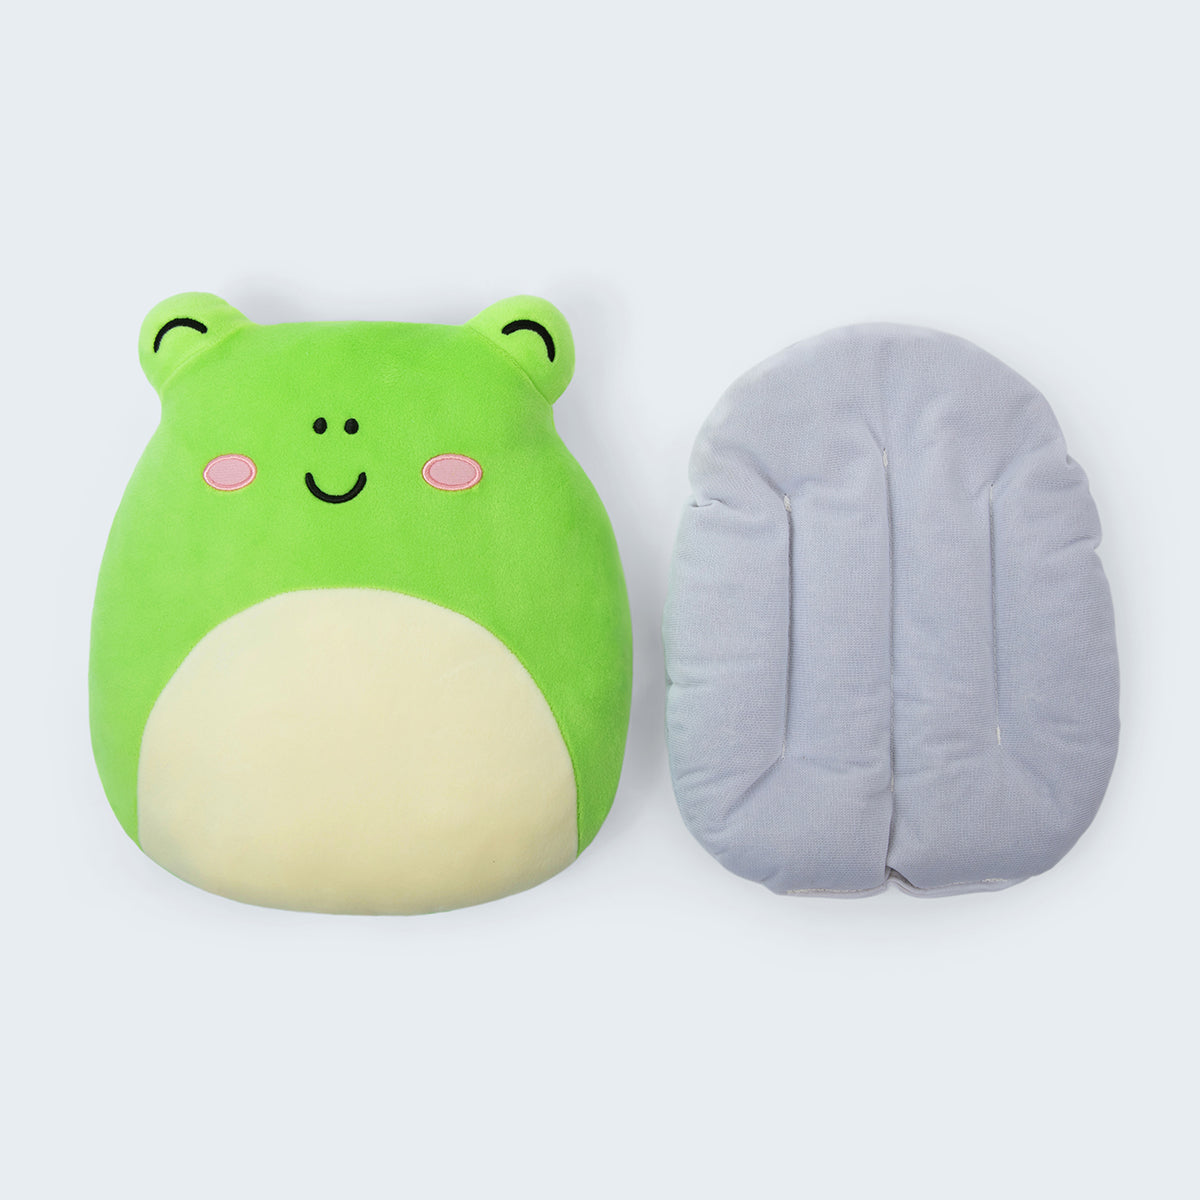 Squishmallows Wendy Heating Pad: Adorable Froggy Comfort – Relatable